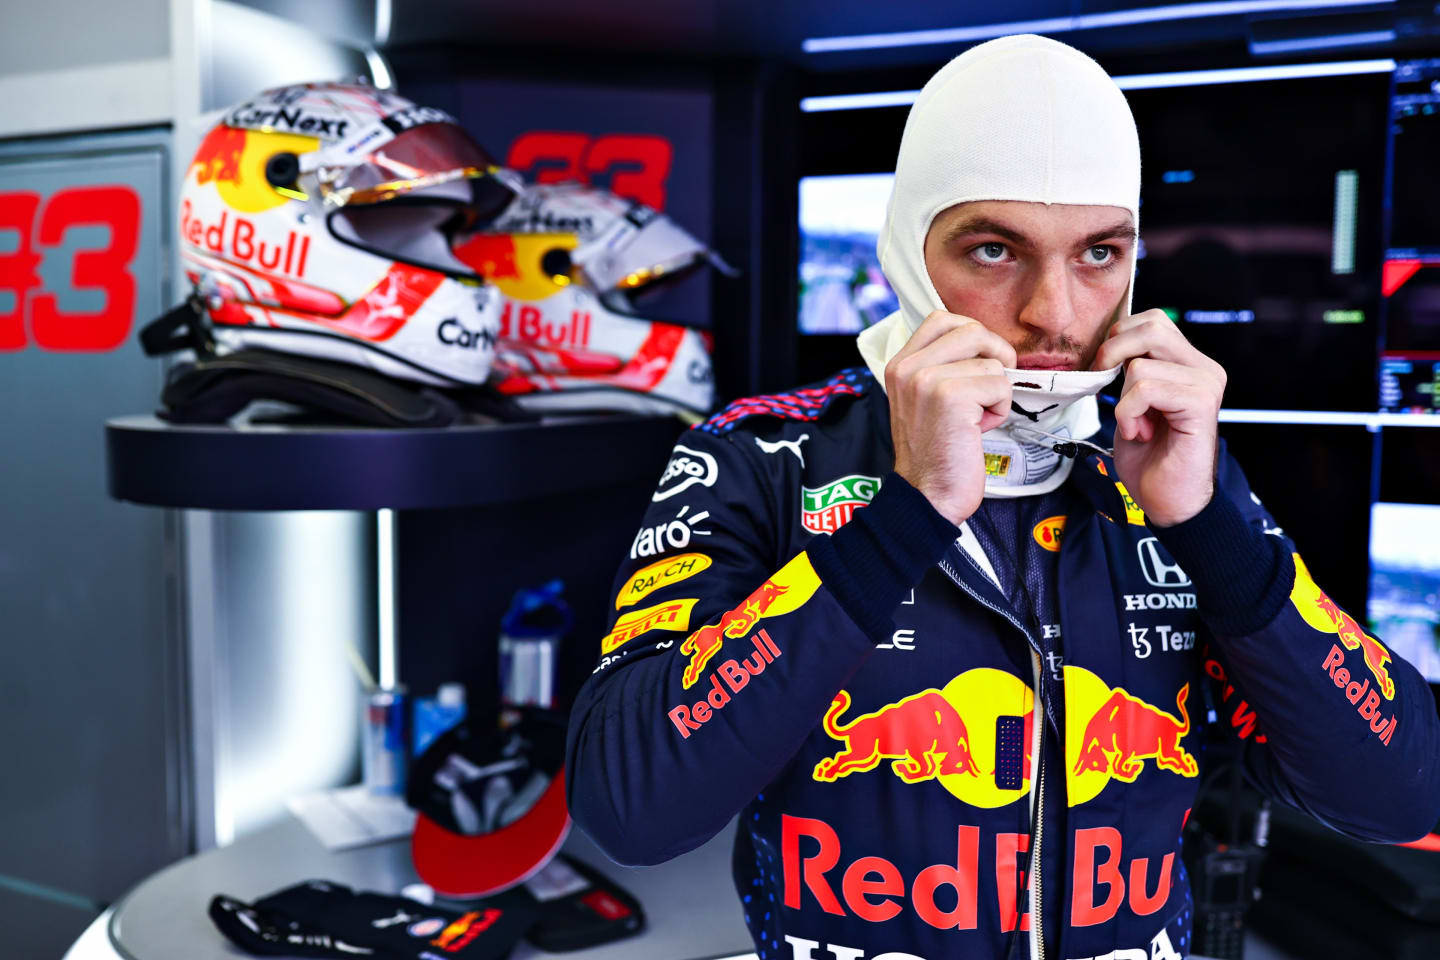 SOCHI, RUSSIA - SEPTEMBER 24: Max Verstappen of Netherlands and Red Bull Racing prepares to drive